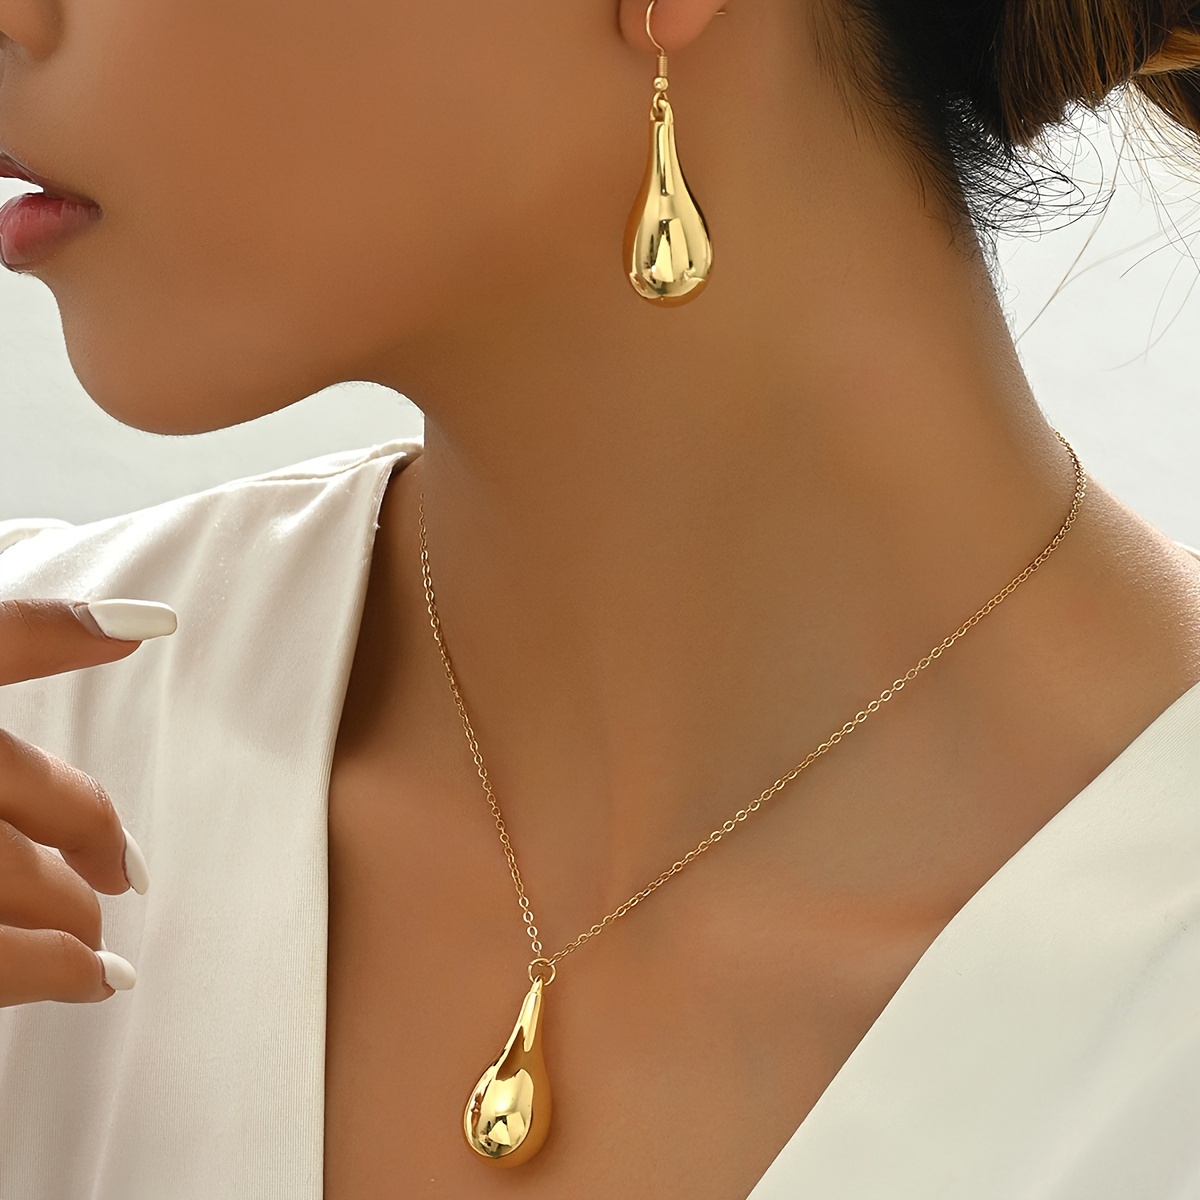 

1 Set Golden Teardrop Pendant Necklace And Earrings Set, Elegant Simple Everyday Jewelry For Women, Vacation & Minimalist Style